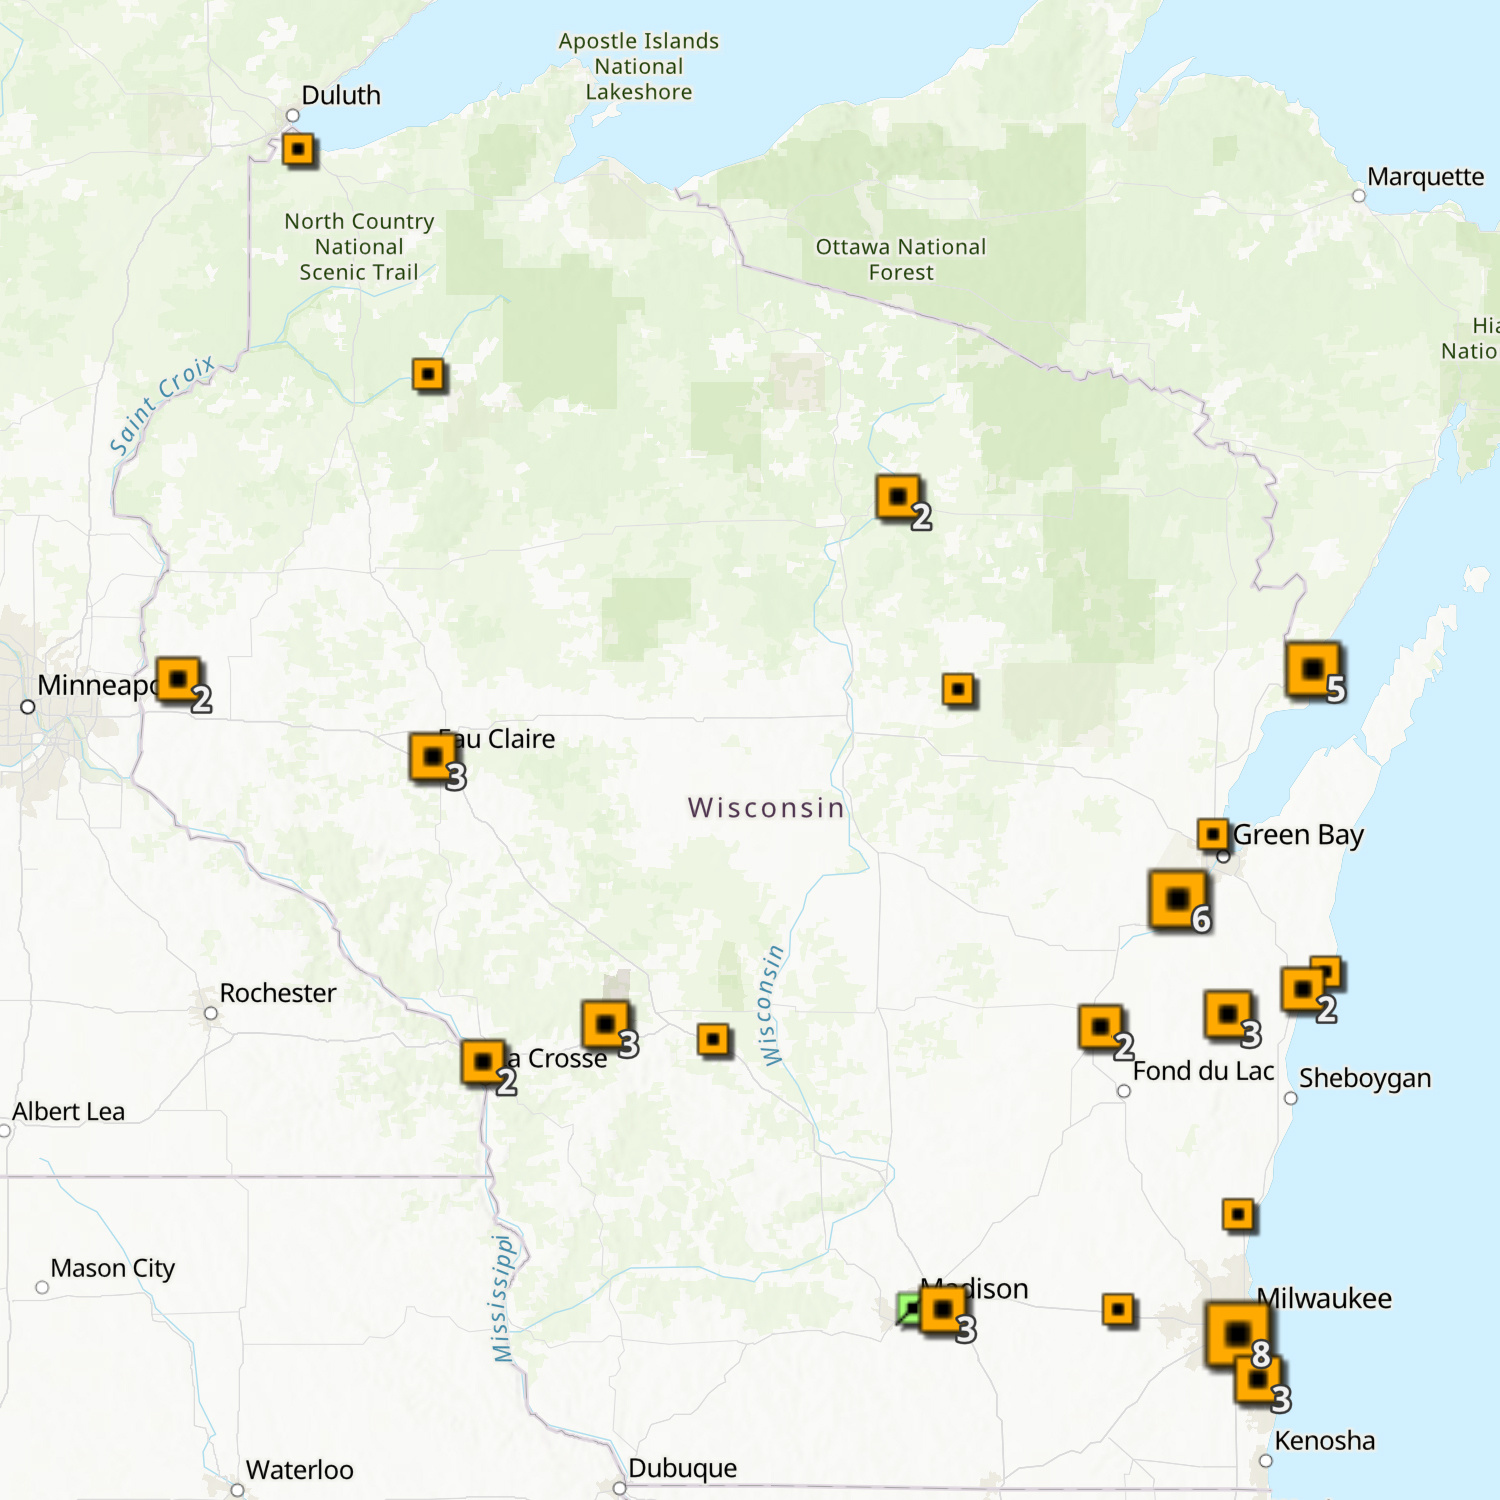 A map of Wisconsin features squares of different sizes indicating the location of PFAS contamination investigations.